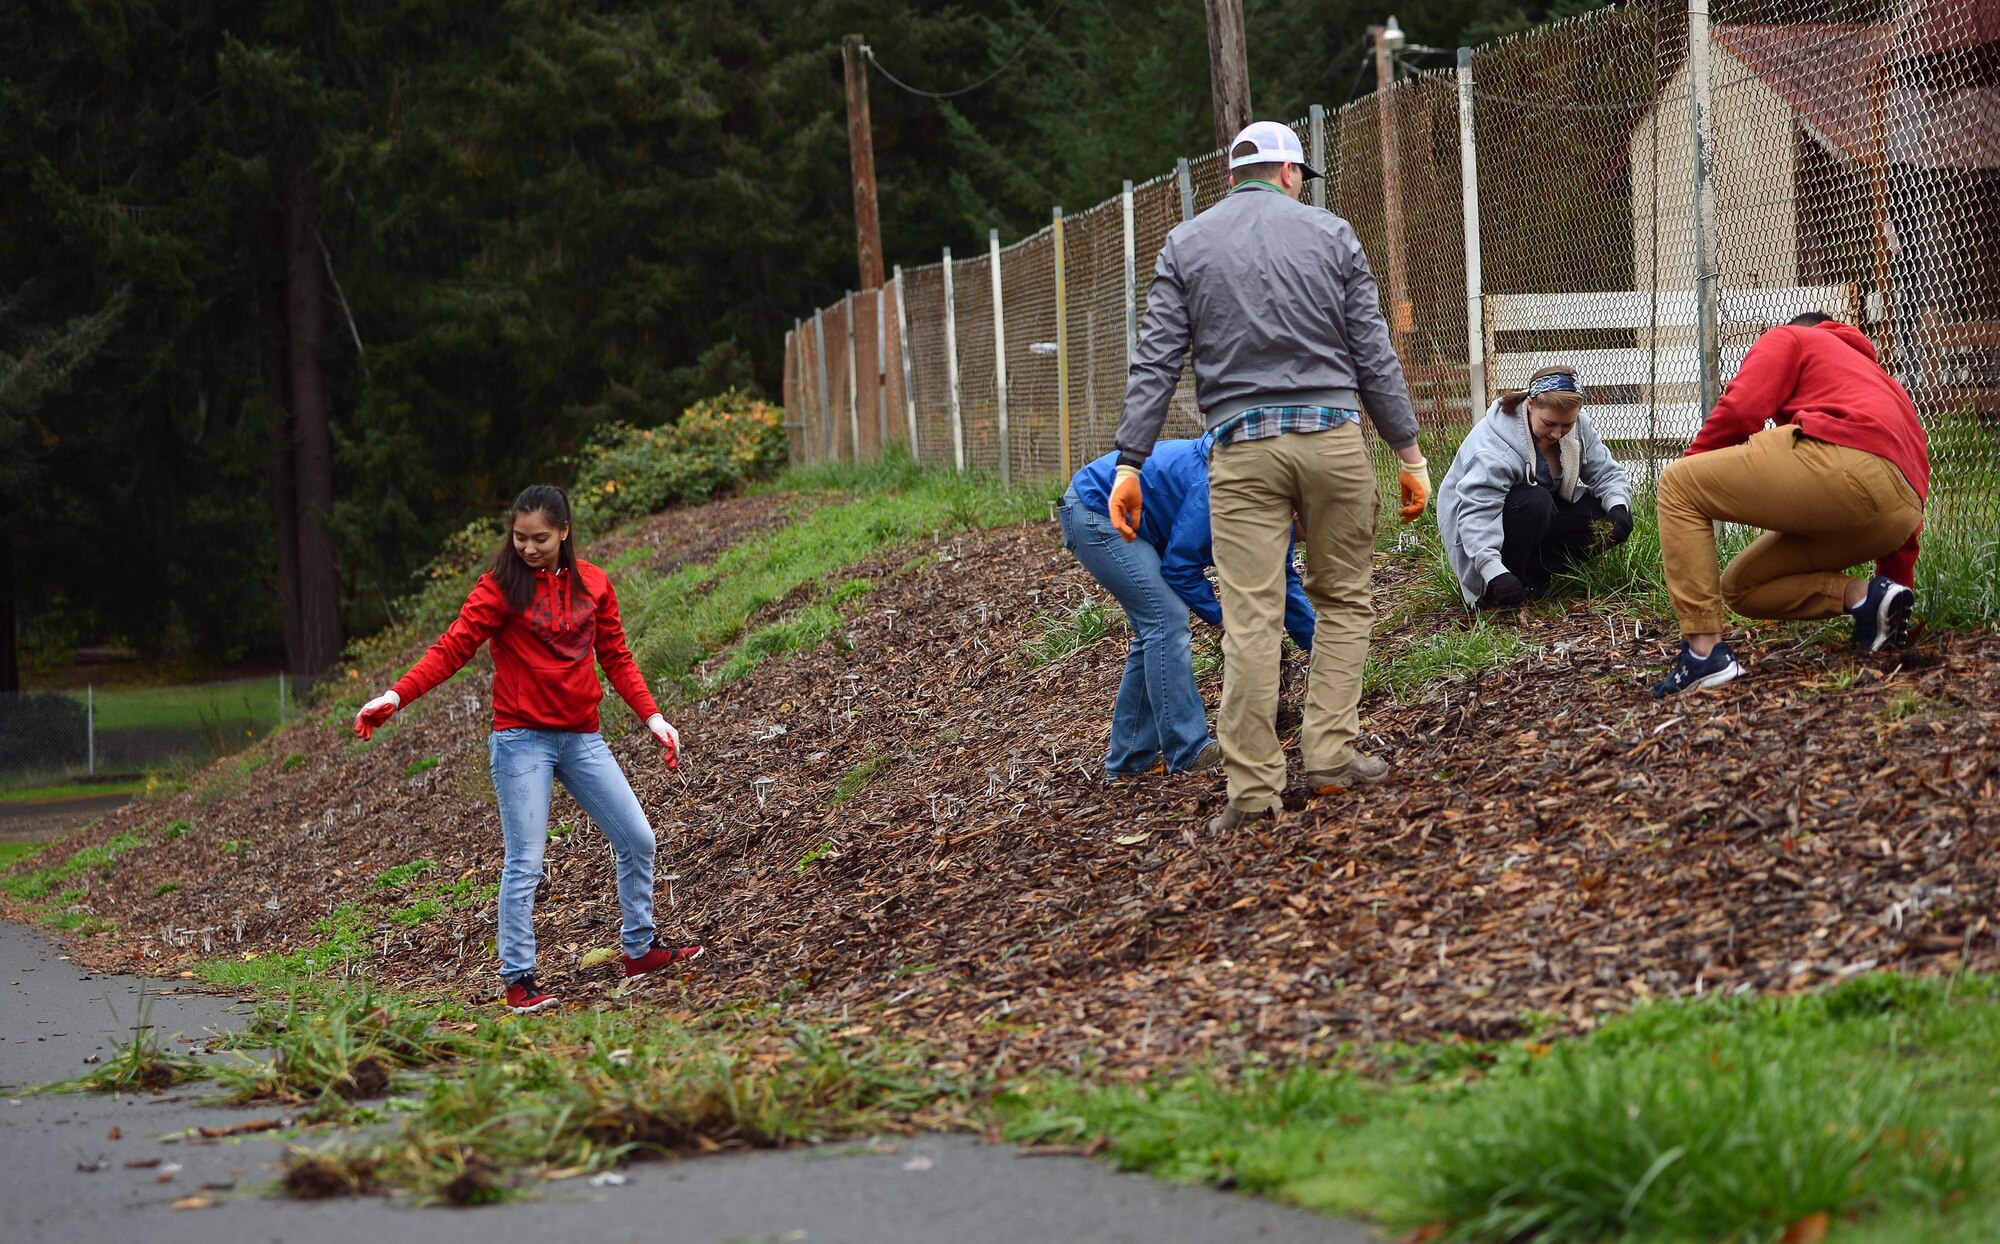 Airman 1st Class Alexis Faucett (left), 627th Logistics Readiness Squadron vehicle operator, and Airmen from the 627th LRS clear Thurston County Fairgrounds of weeds during a Day of Service Oct. 27, 2016, in Olympia, Wash. This is the third year Airmen have participated in the event to help improve the local community. (U.S. Air Force photo/Senior Airman Jacob Jimenez) 